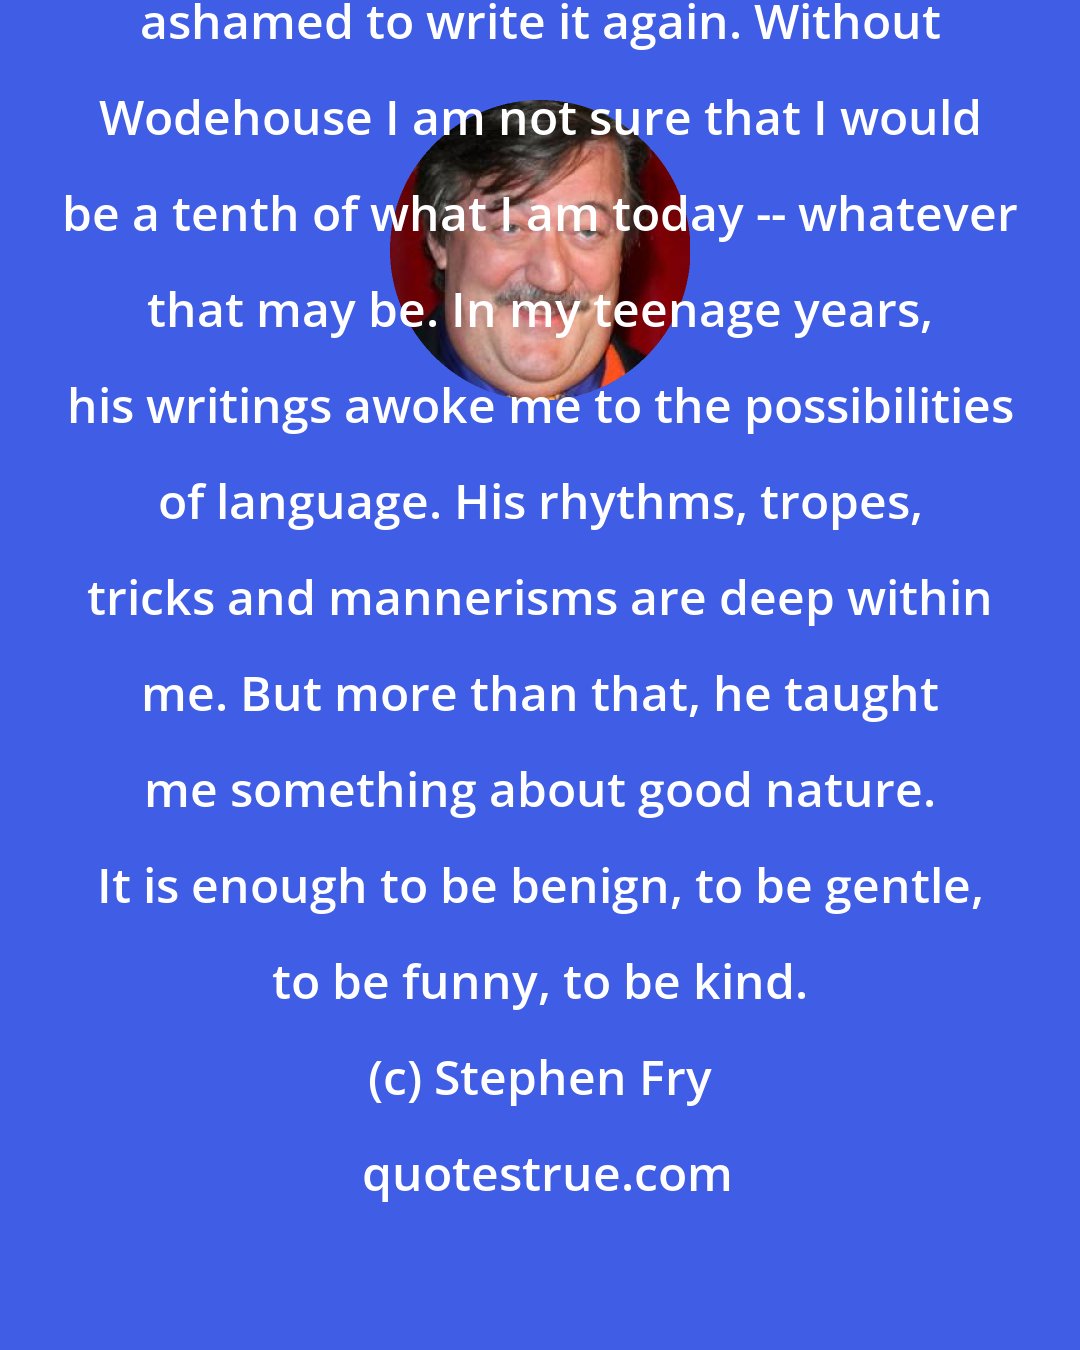 Stephen Fry: I have written it before and am not ashamed to write it again. Without Wodehouse I am not sure that I would be a tenth of what I am today -- whatever that may be. In my teenage years, his writings awoke me to the possibilities of language. His rhythms, tropes, tricks and mannerisms are deep within me. But more than that, he taught me something about good nature. It is enough to be benign, to be gentle, to be funny, to be kind.